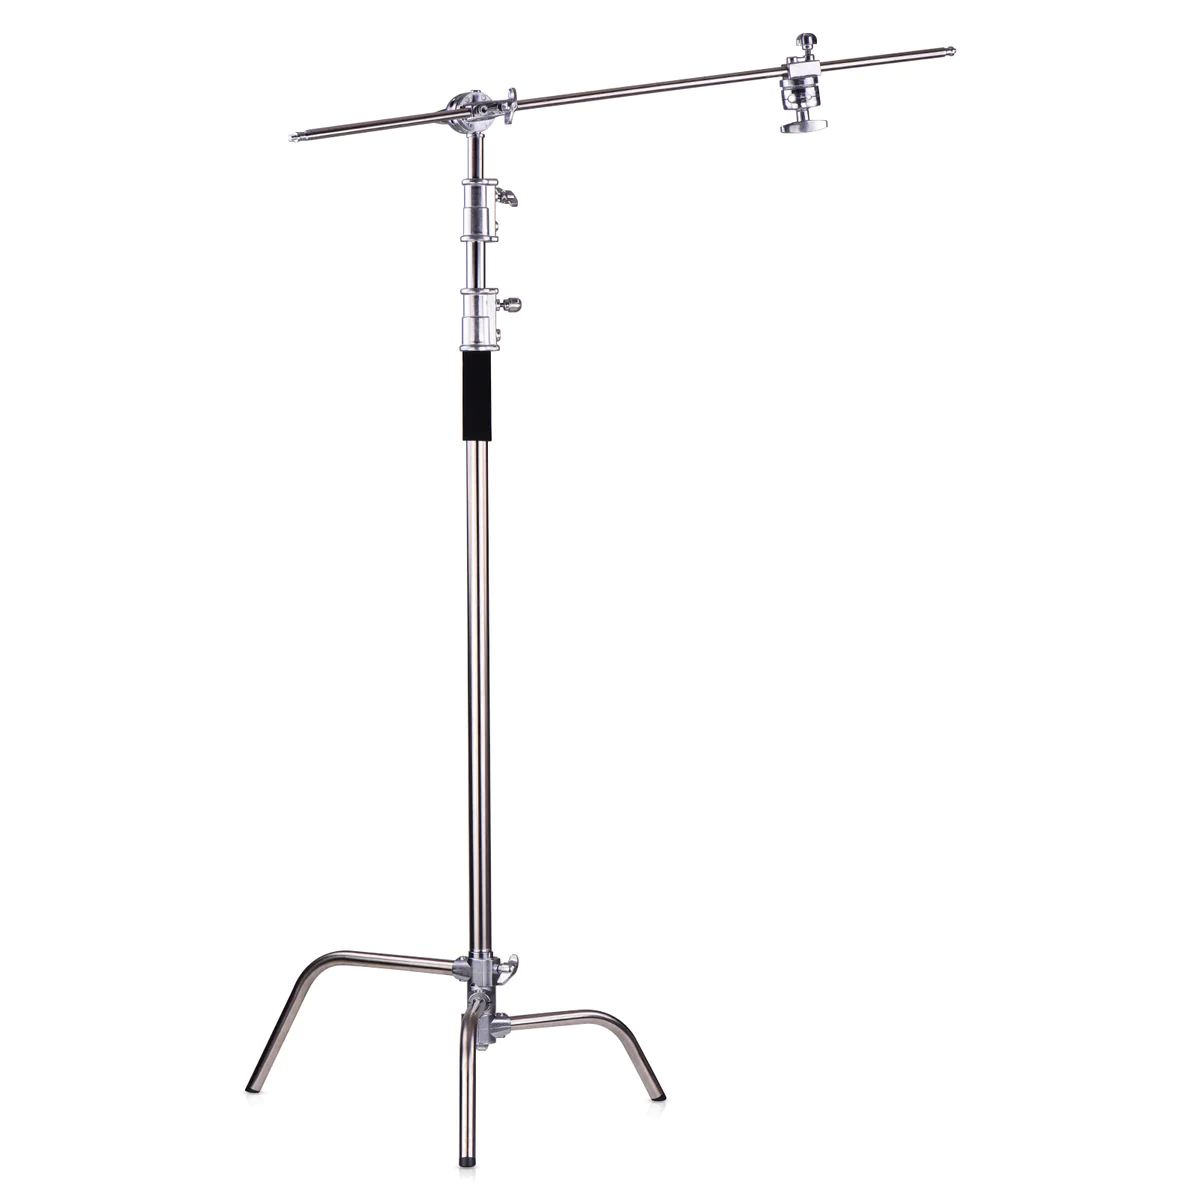 HIFFIN C Stand, 9.8 Ft Steel Light C-Stand, 40-Inch Detachable Base, C  Stand With Grip Kit And Extension Arm, For Photography Studio Video  Reflector